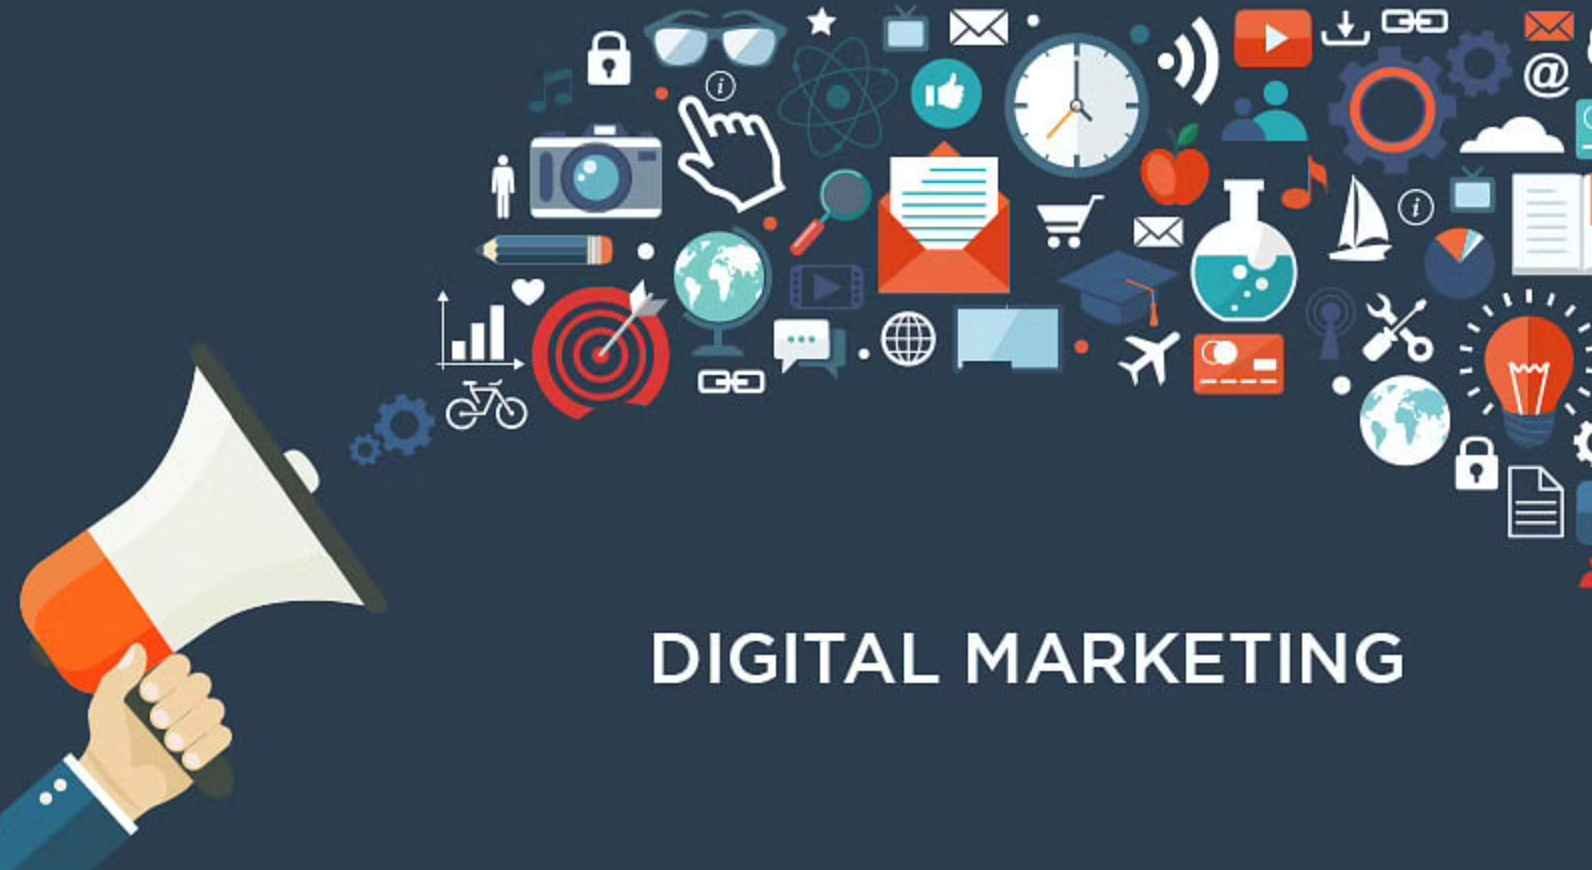 Digital Marketing Features That Will Make Your Life Easier